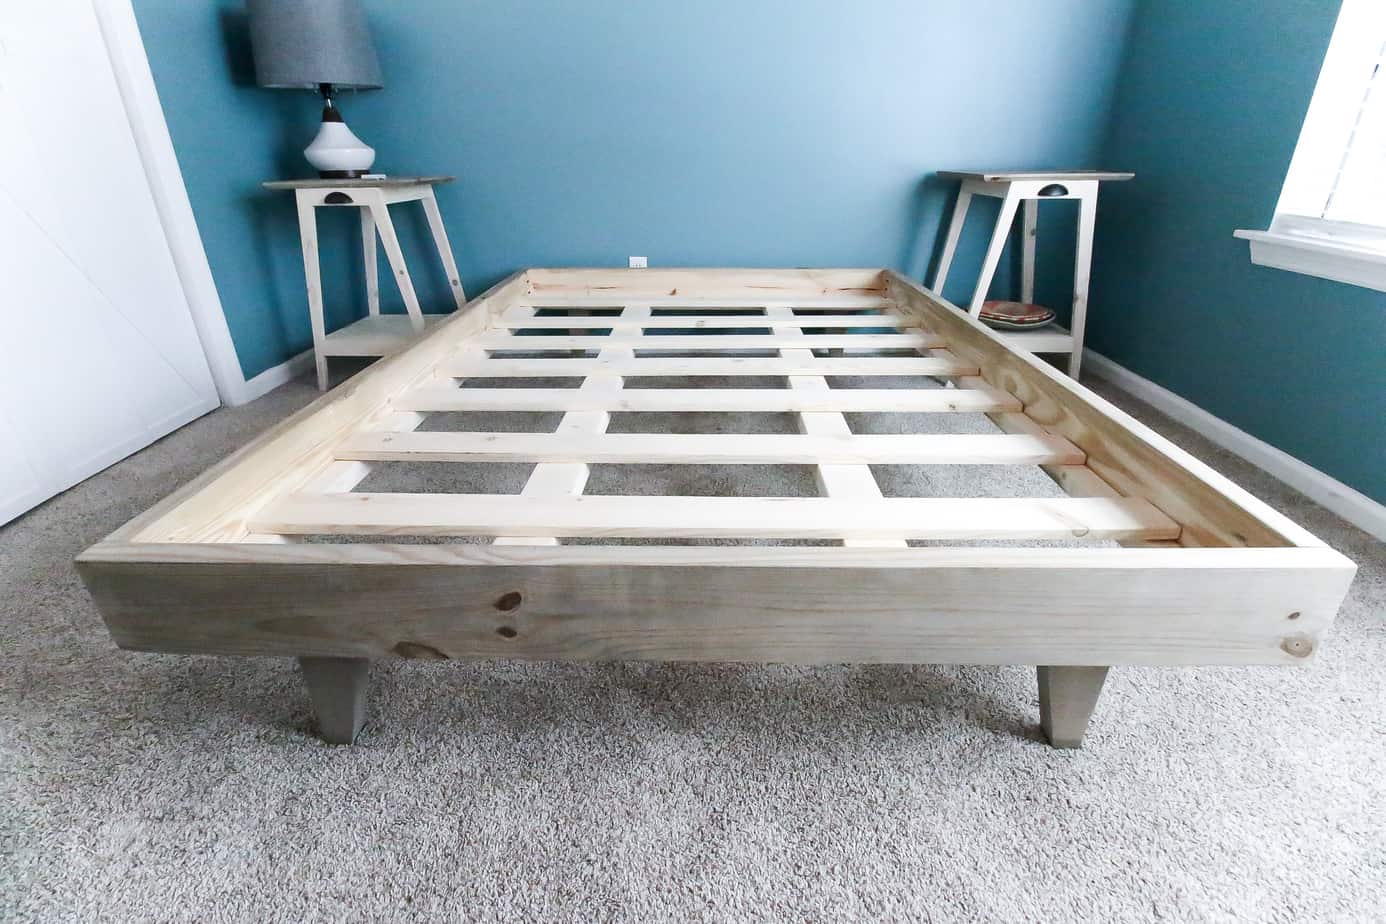 How To Build A Platform Bed For 50, How To Build A Queen Size Bed Frame Out Of Wood